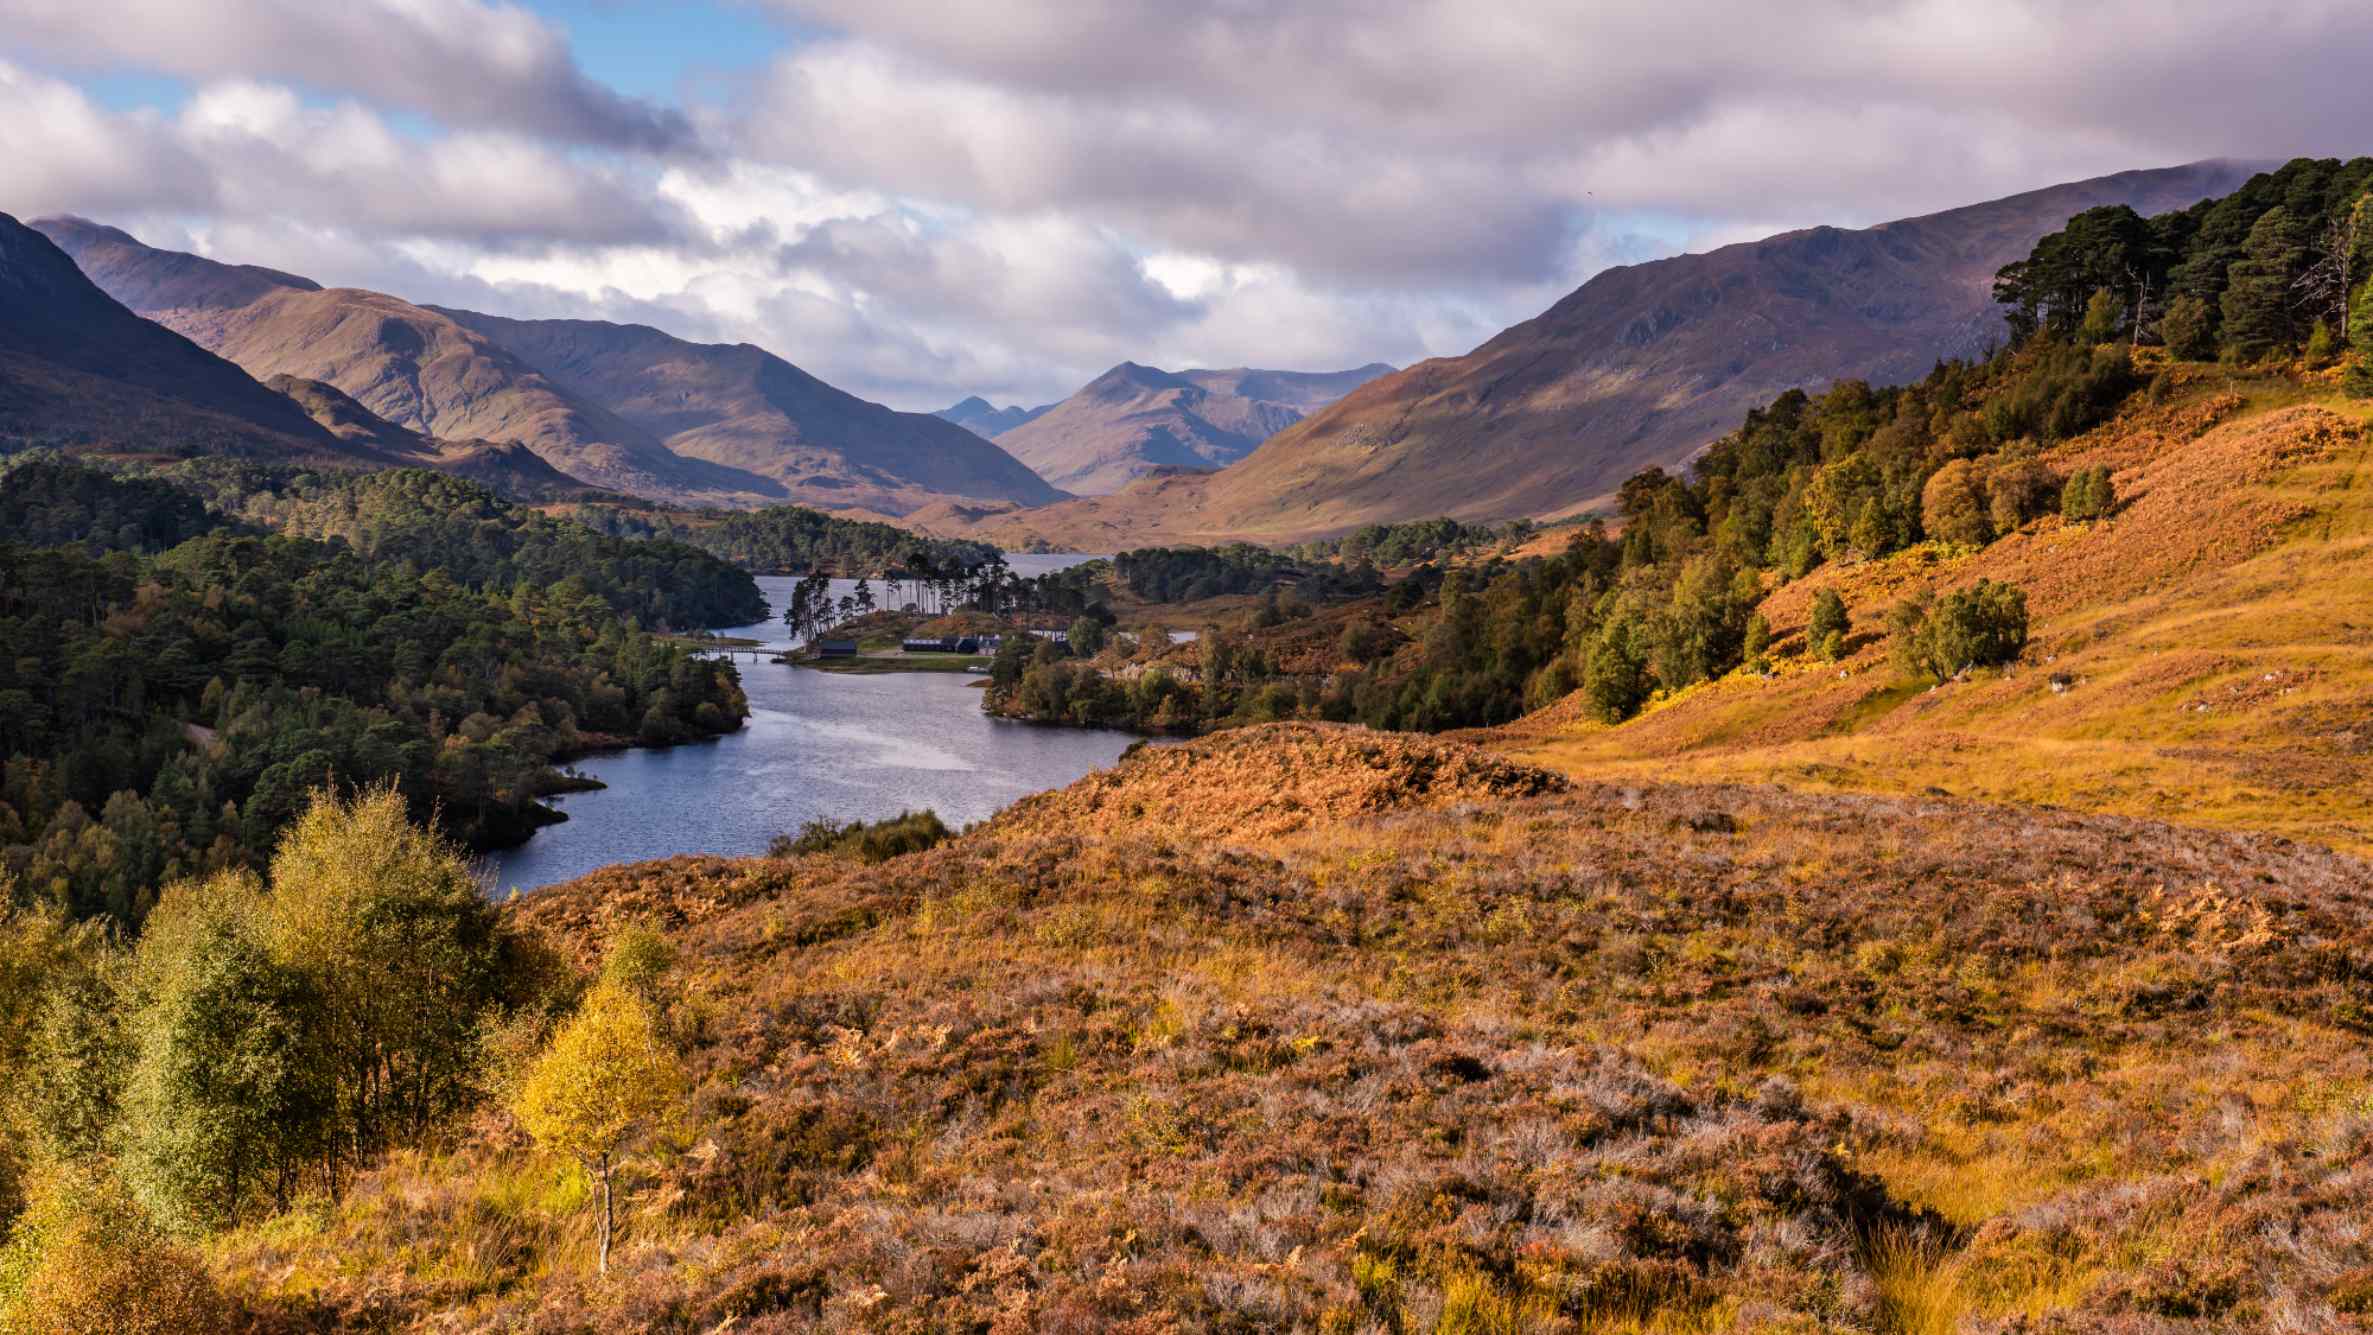 Glen Affric’s stunning landscape is the perfect combination of pinewoods, lochs, rivers and mountains.